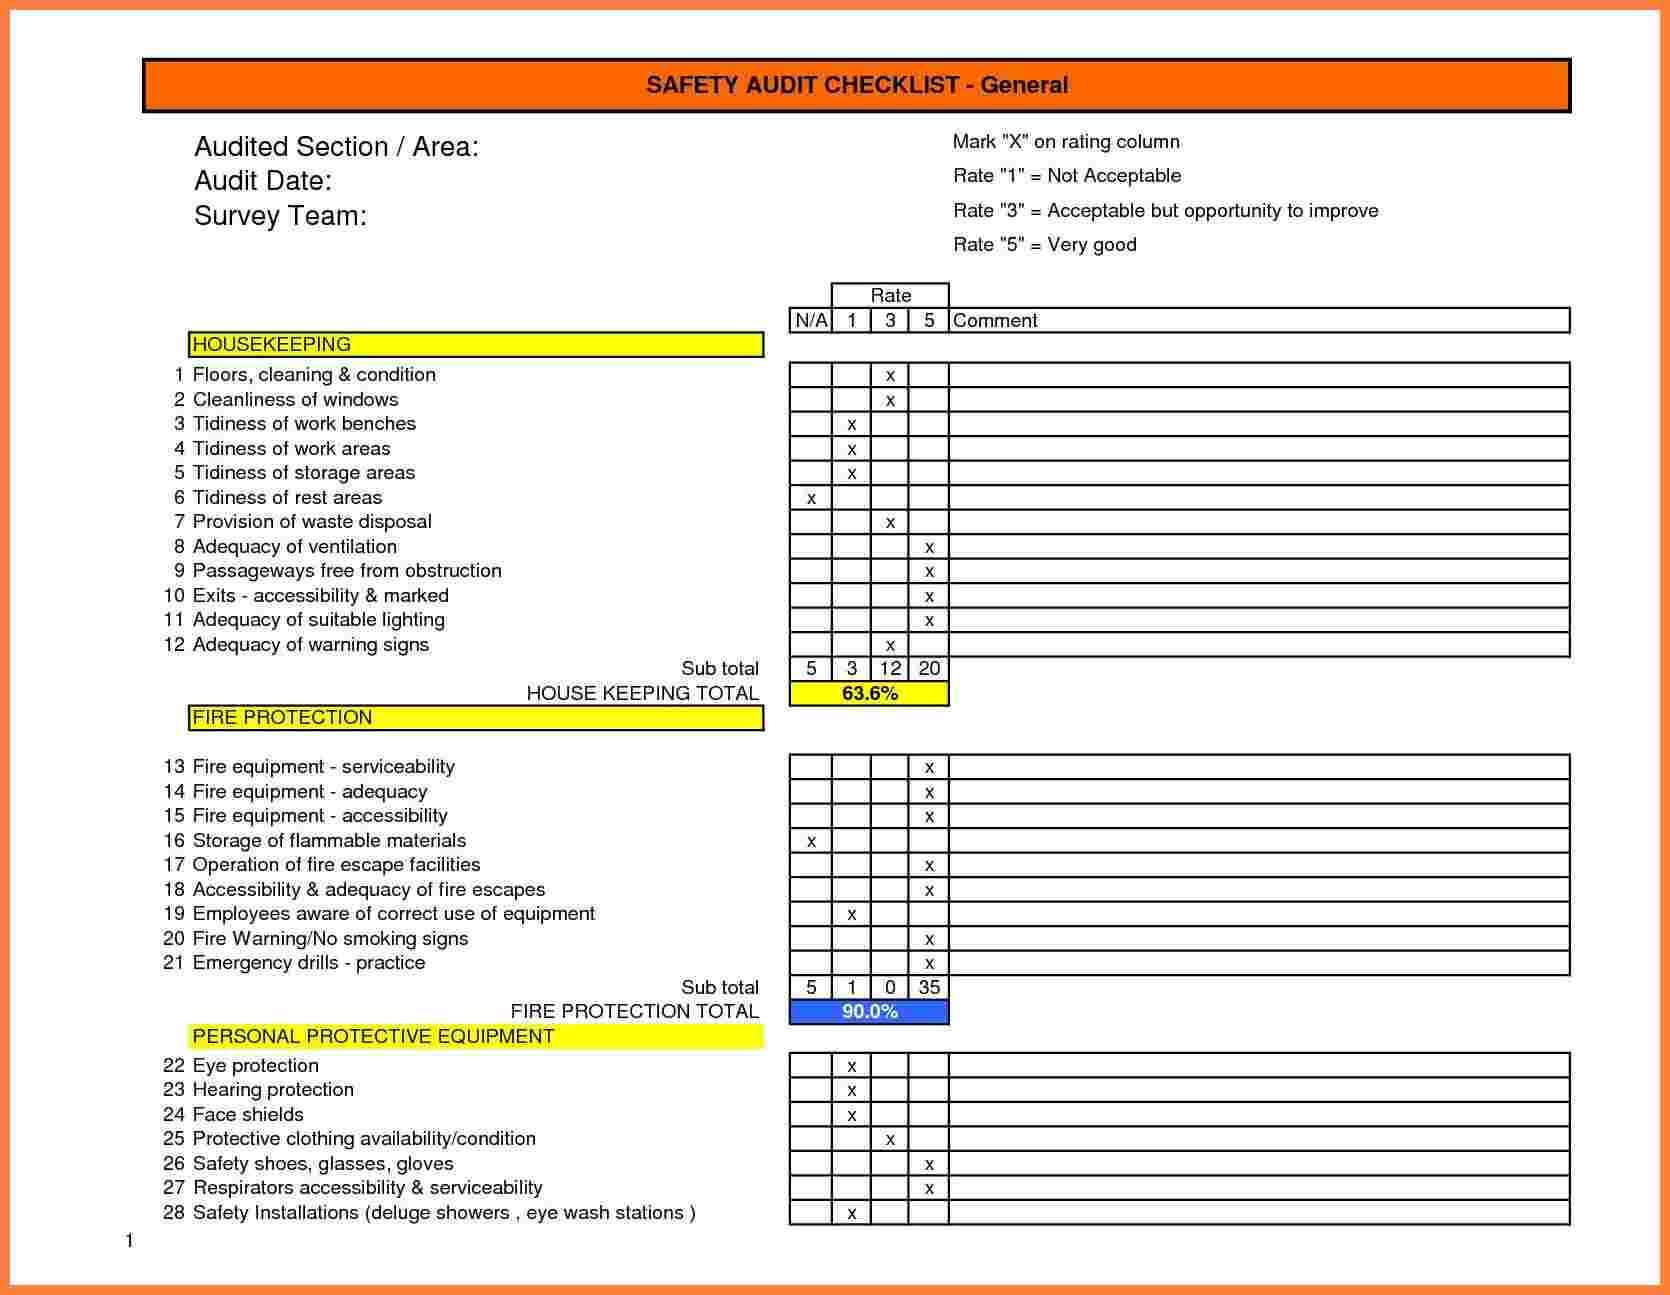 Image Result For Warehouse Health And Safety Audit Form Throughout Safety Analysis Report Template